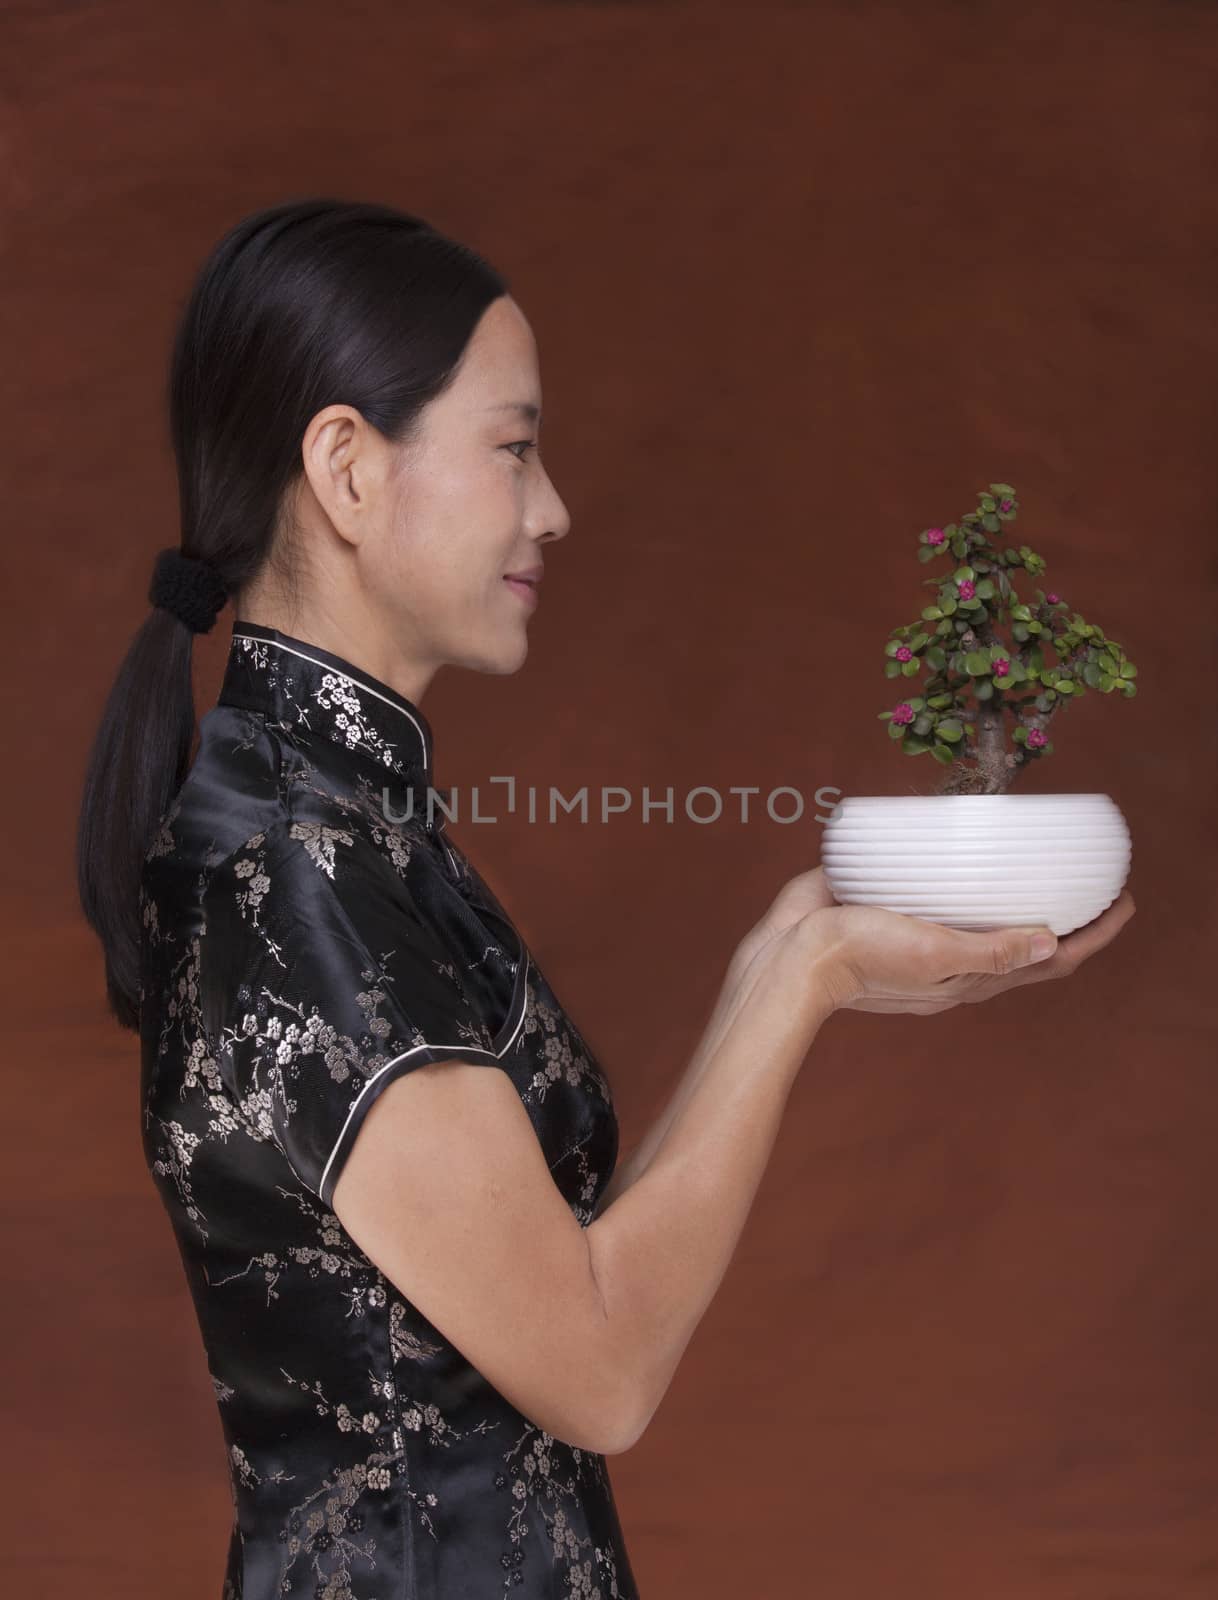 Side view of woman in traditional clothing holding a small plant in a flower pot, studio shot